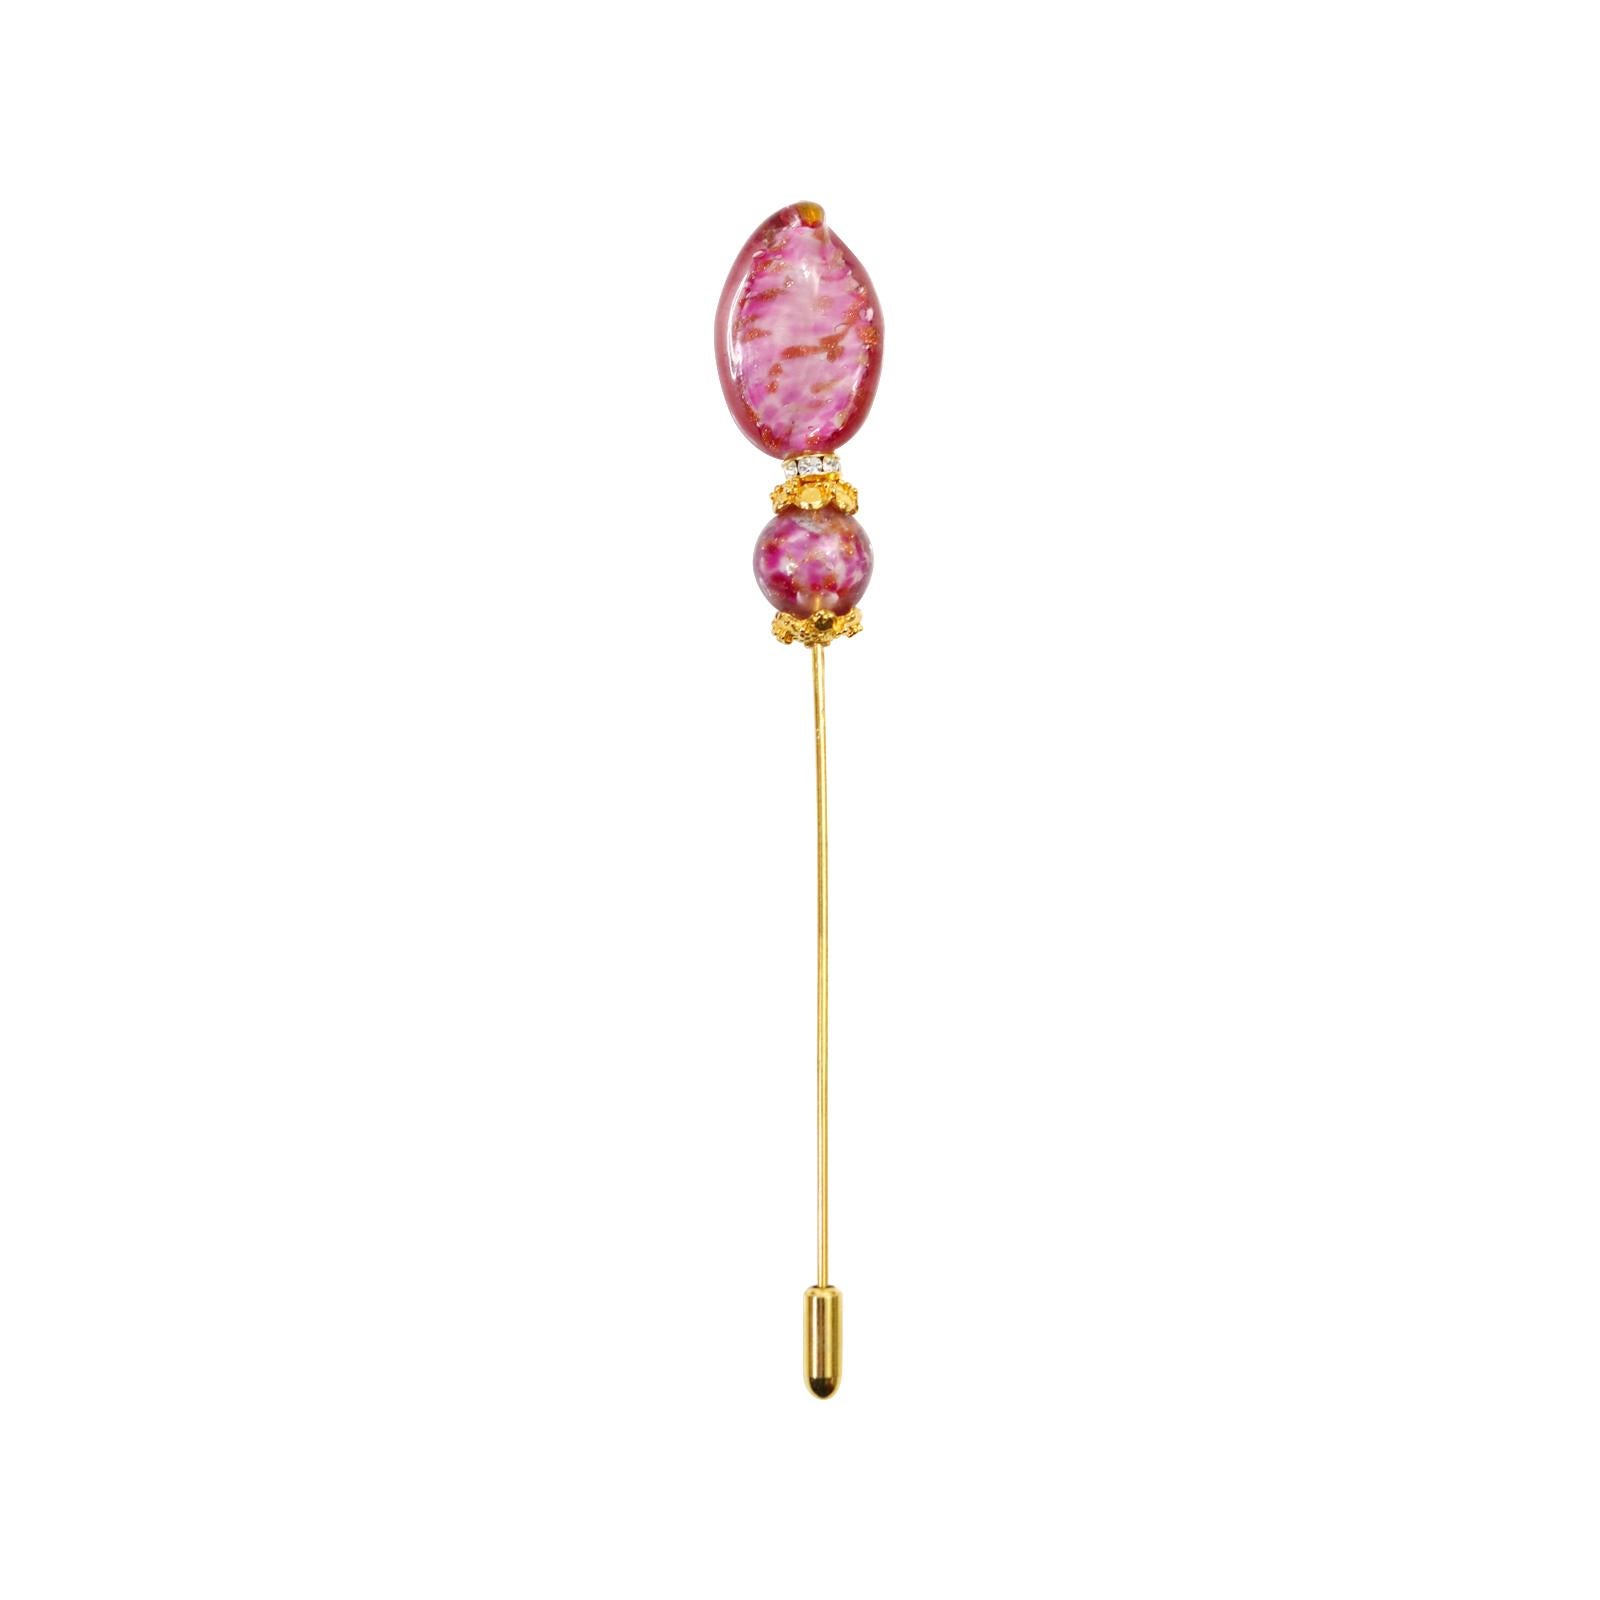 Modern Vintage Pink Stone with Diamante in Gold Tone Lapel Pin Brooch, circa 1990s For Sale